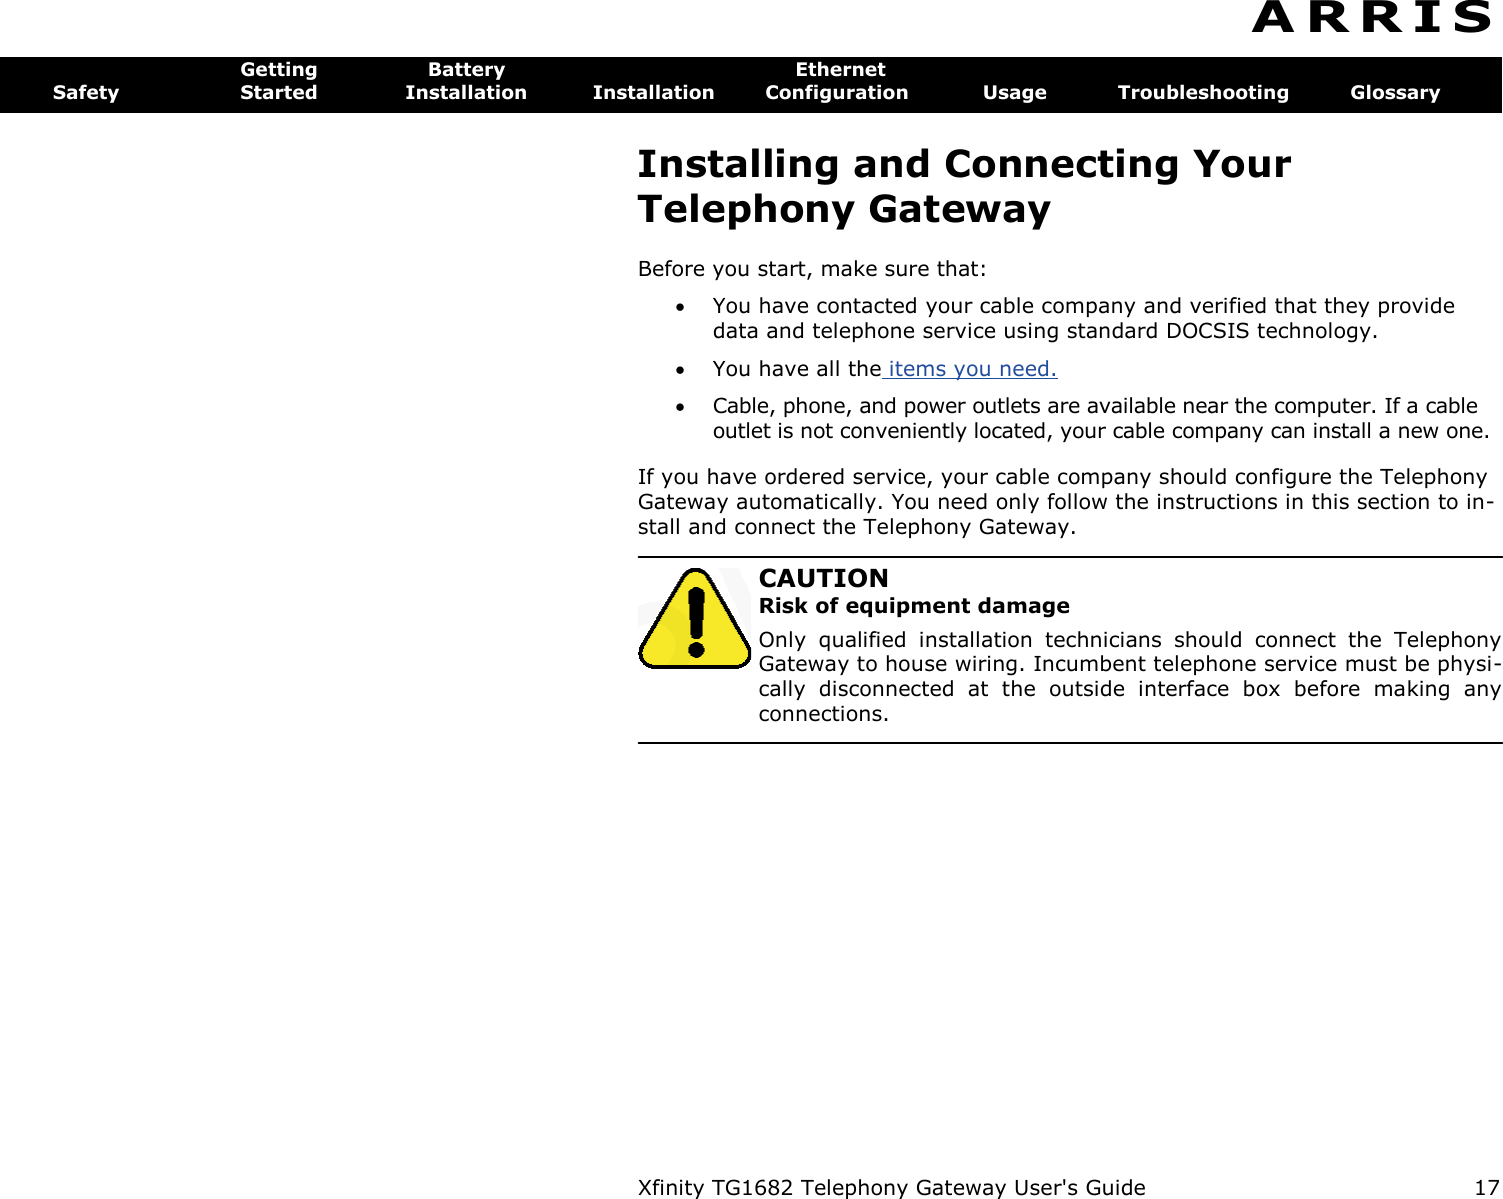 Xfinity TG1682 Telephony Gateway User&apos;s Guide  17  A R R I S  Getting  Battery  Ethernet Safety  Started  Installation  Installation  Configuration  Usage  Troubleshooting  Glossary Installing and Connecting Your Telephony Gateway Before you start, make sure that:  You have contacted your cable company and verified that they provide data and telephone service using standard DOCSIS technology.  You have all the items you need.  Cable, phone, and power outlets are available near the computer. If a cable outlet is not conveniently located, your cable company can install a new one. If you have ordered service, your cable company should configure the Telephony Gateway automatically. You need only follow the instructions in this section to in-stall and connect the Telephony Gateway.   CAUTION Risk of equipment damage Only  qualified  installation  technicians  should  connect  the  Telephony Gateway to house wiring. Incumbent telephone service must be physi-cally  disconnected  at  the  outside  interface  box  before  making  any connections. 